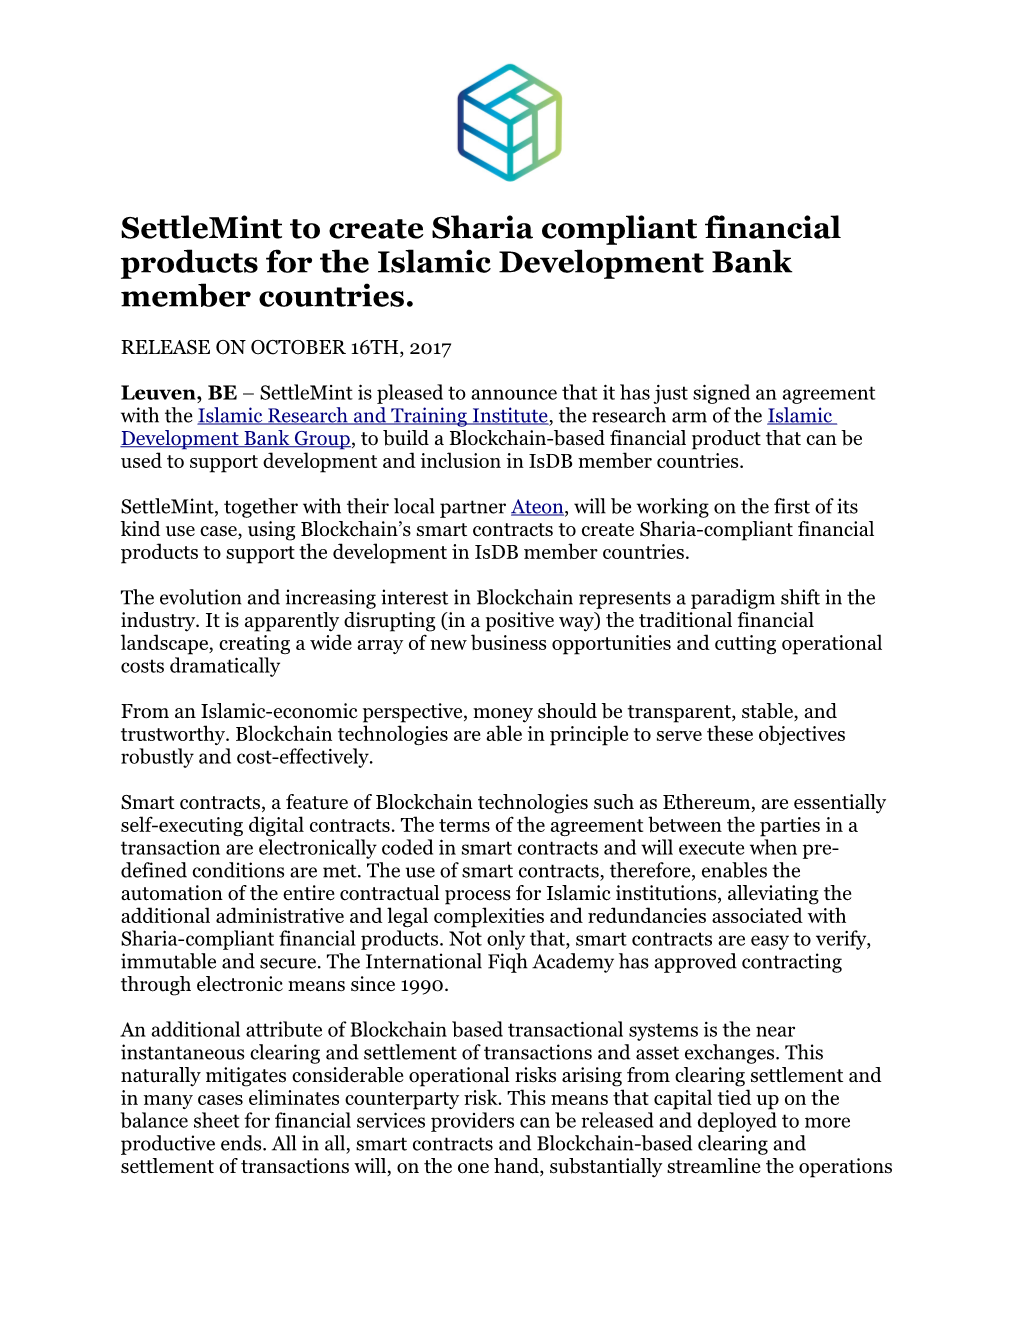 Settlemint to Create Sharia Compliant Financial Products for the Islamic Development Bank